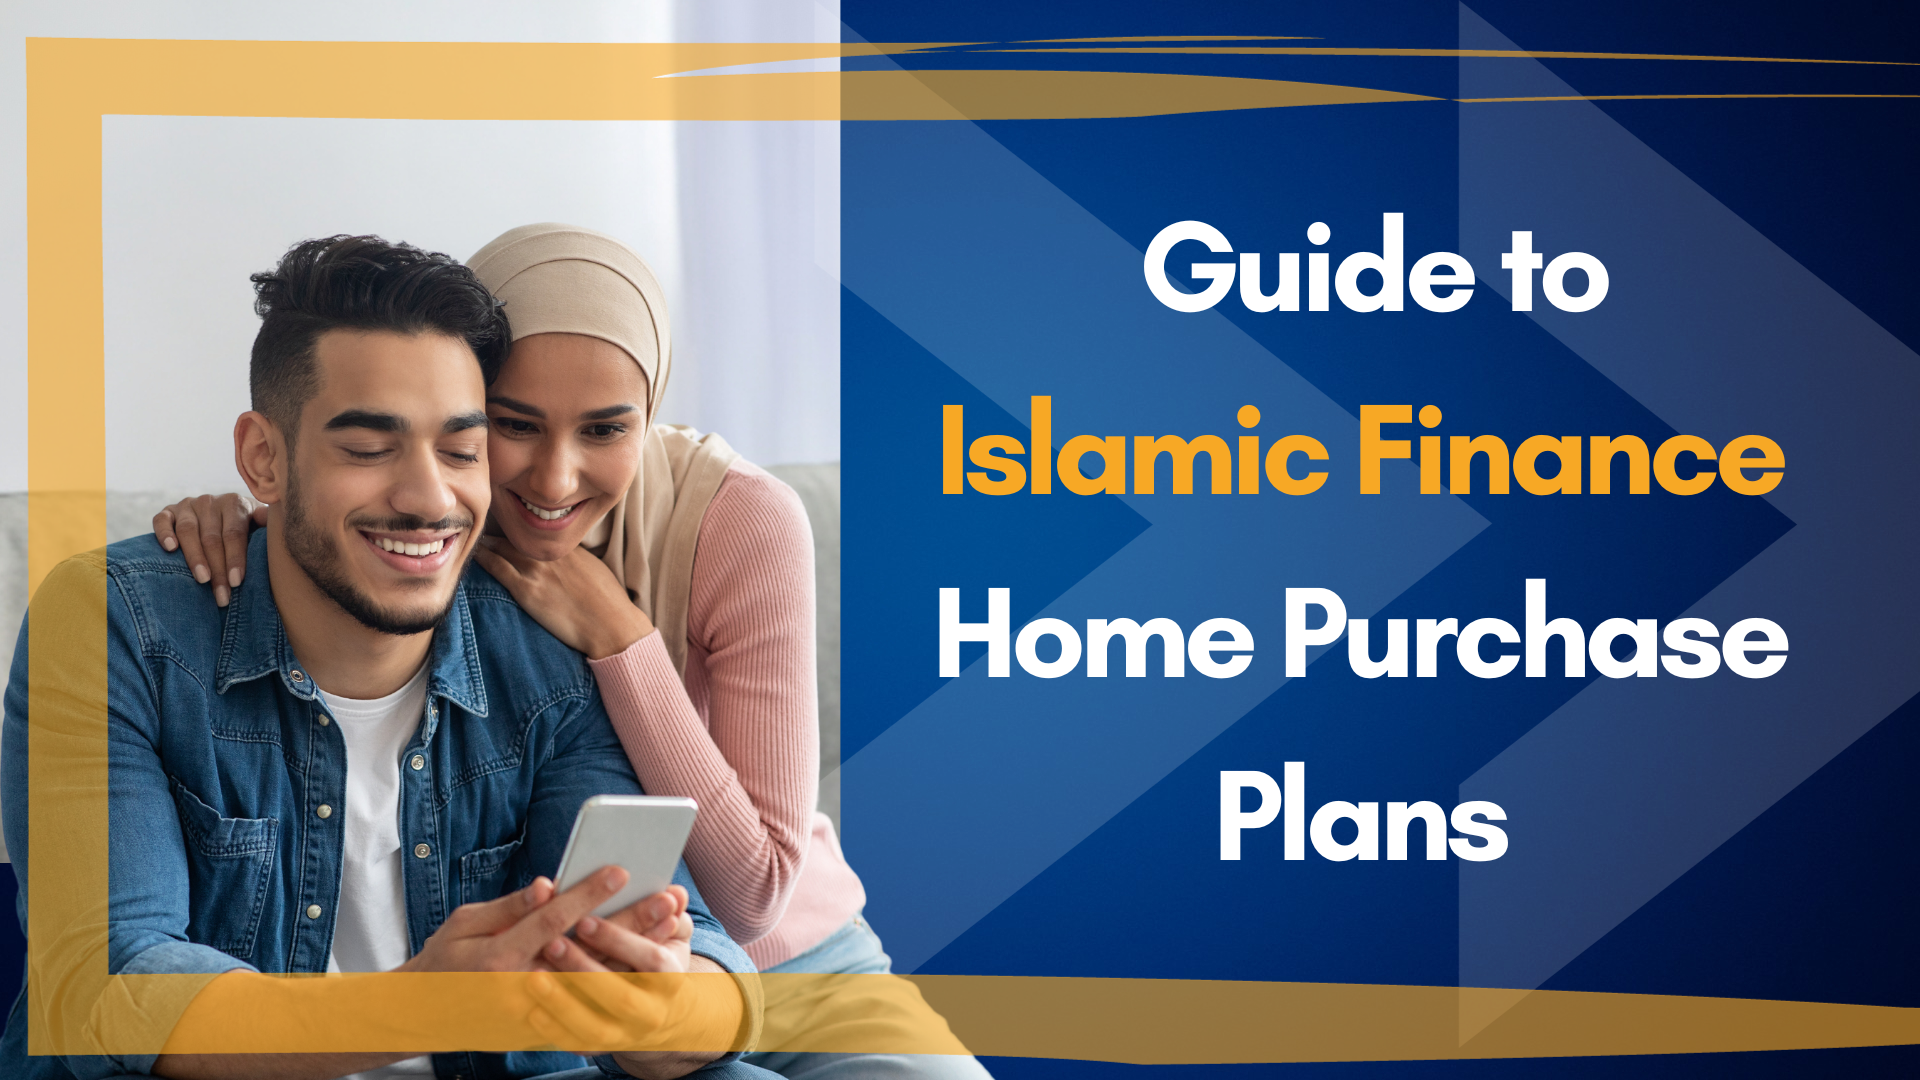 Your guide to Islamic finance home purchase plans    image